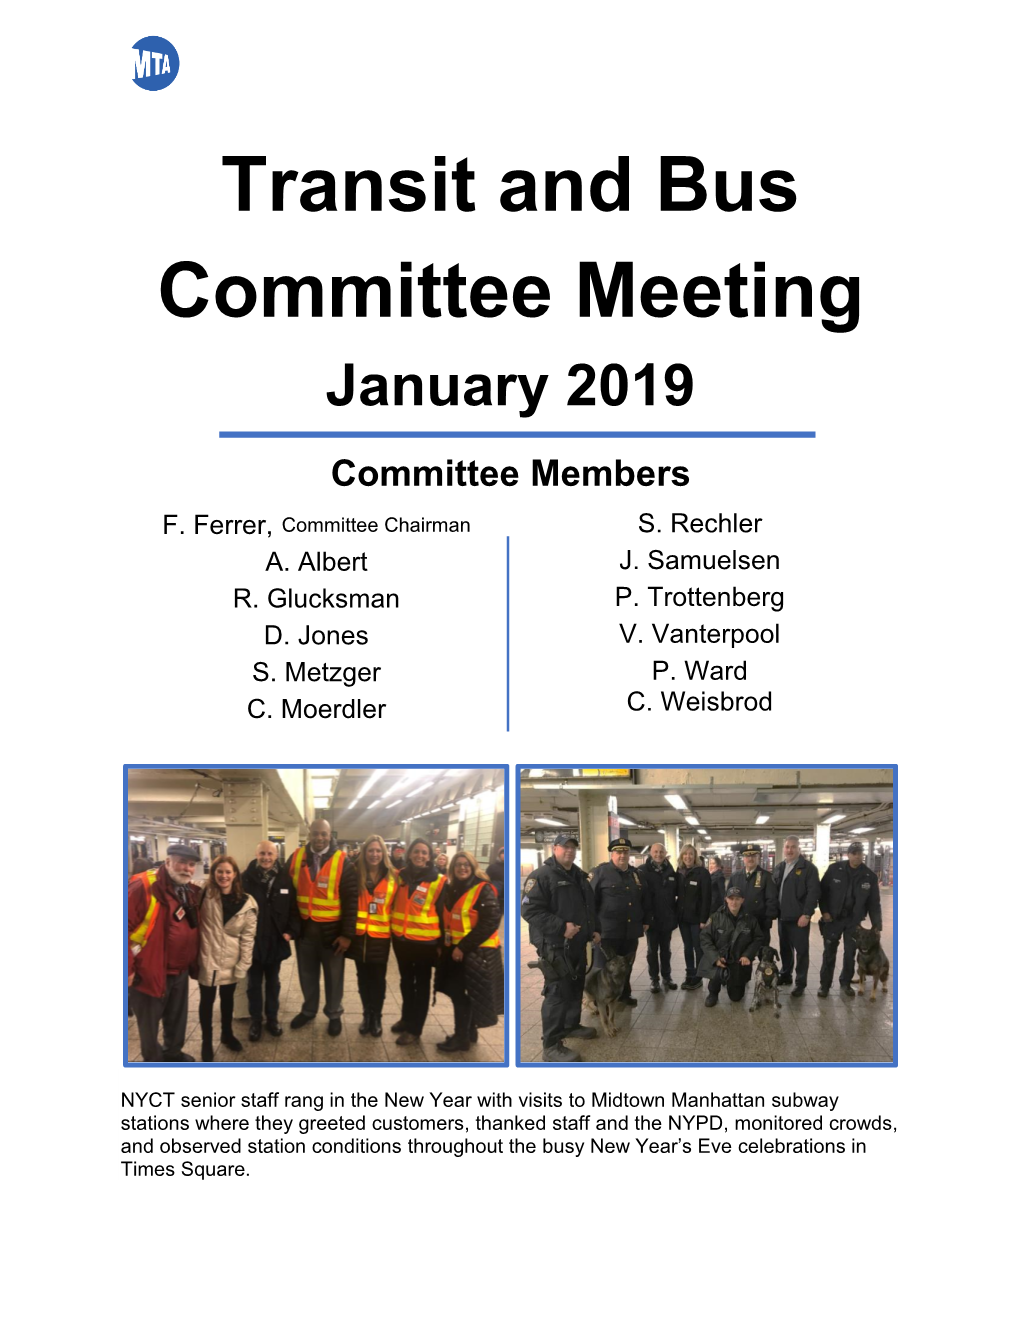 Transit and Bus Committee Meeting January 2019